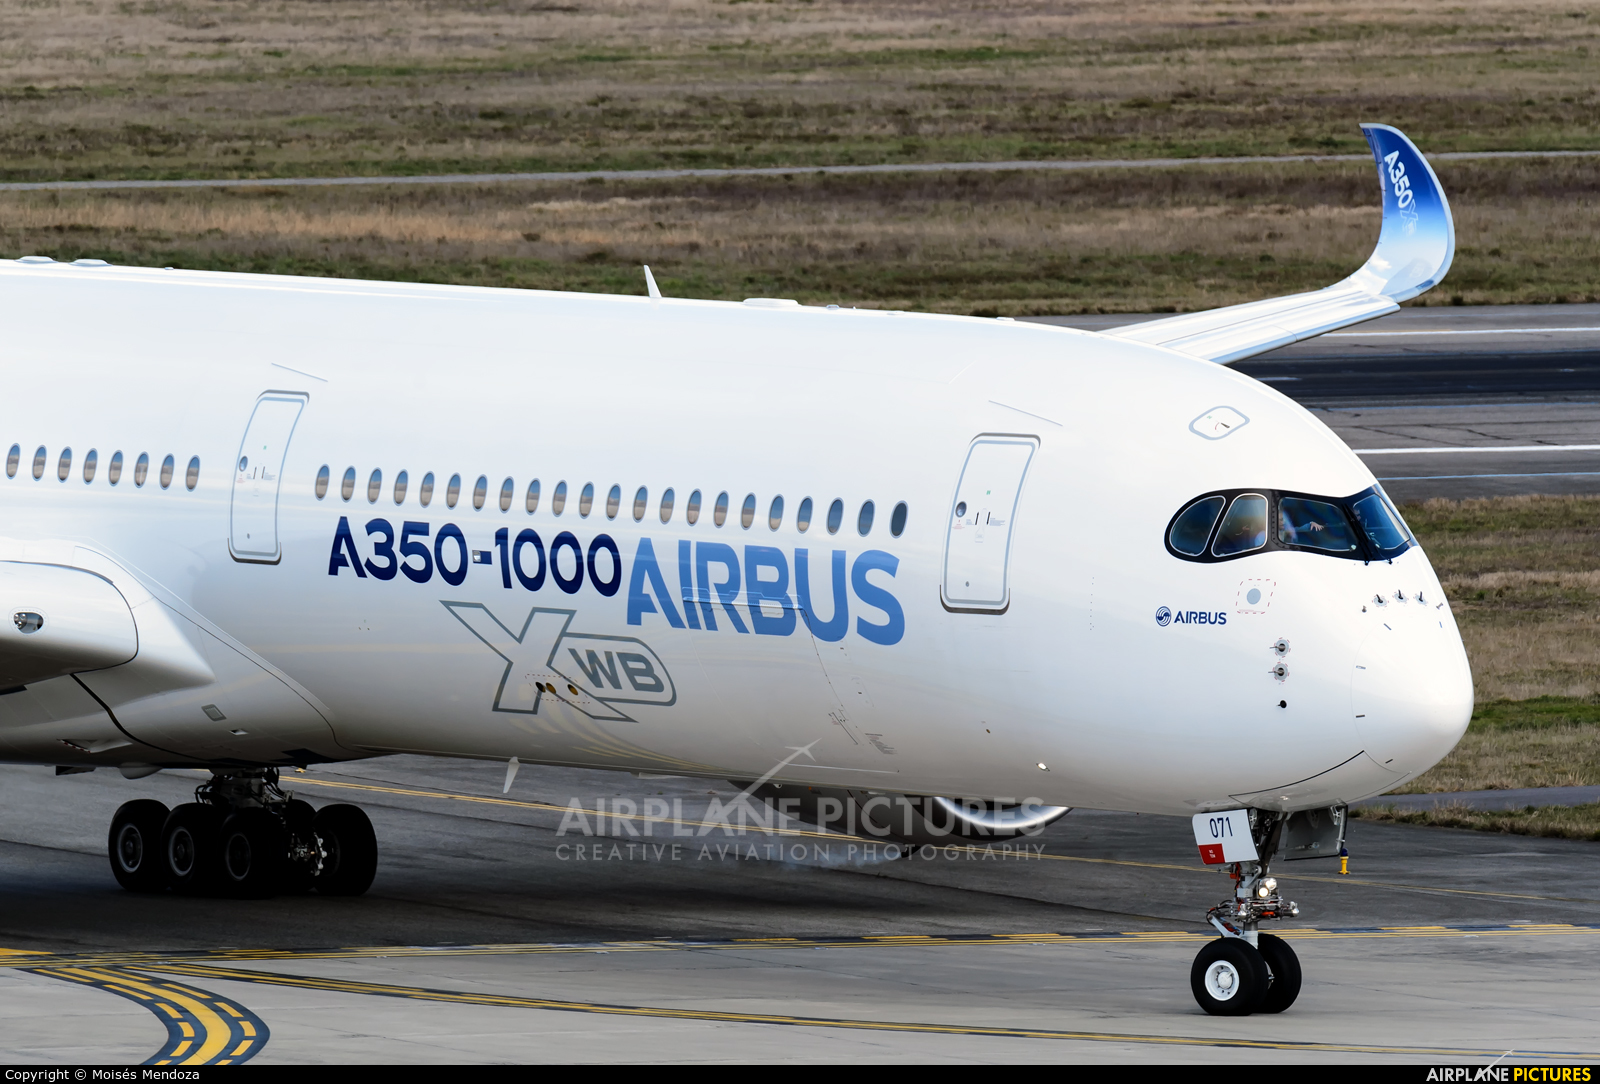 Airbus Industrie F-WWXL aircraft at Toulouse - Blagnac